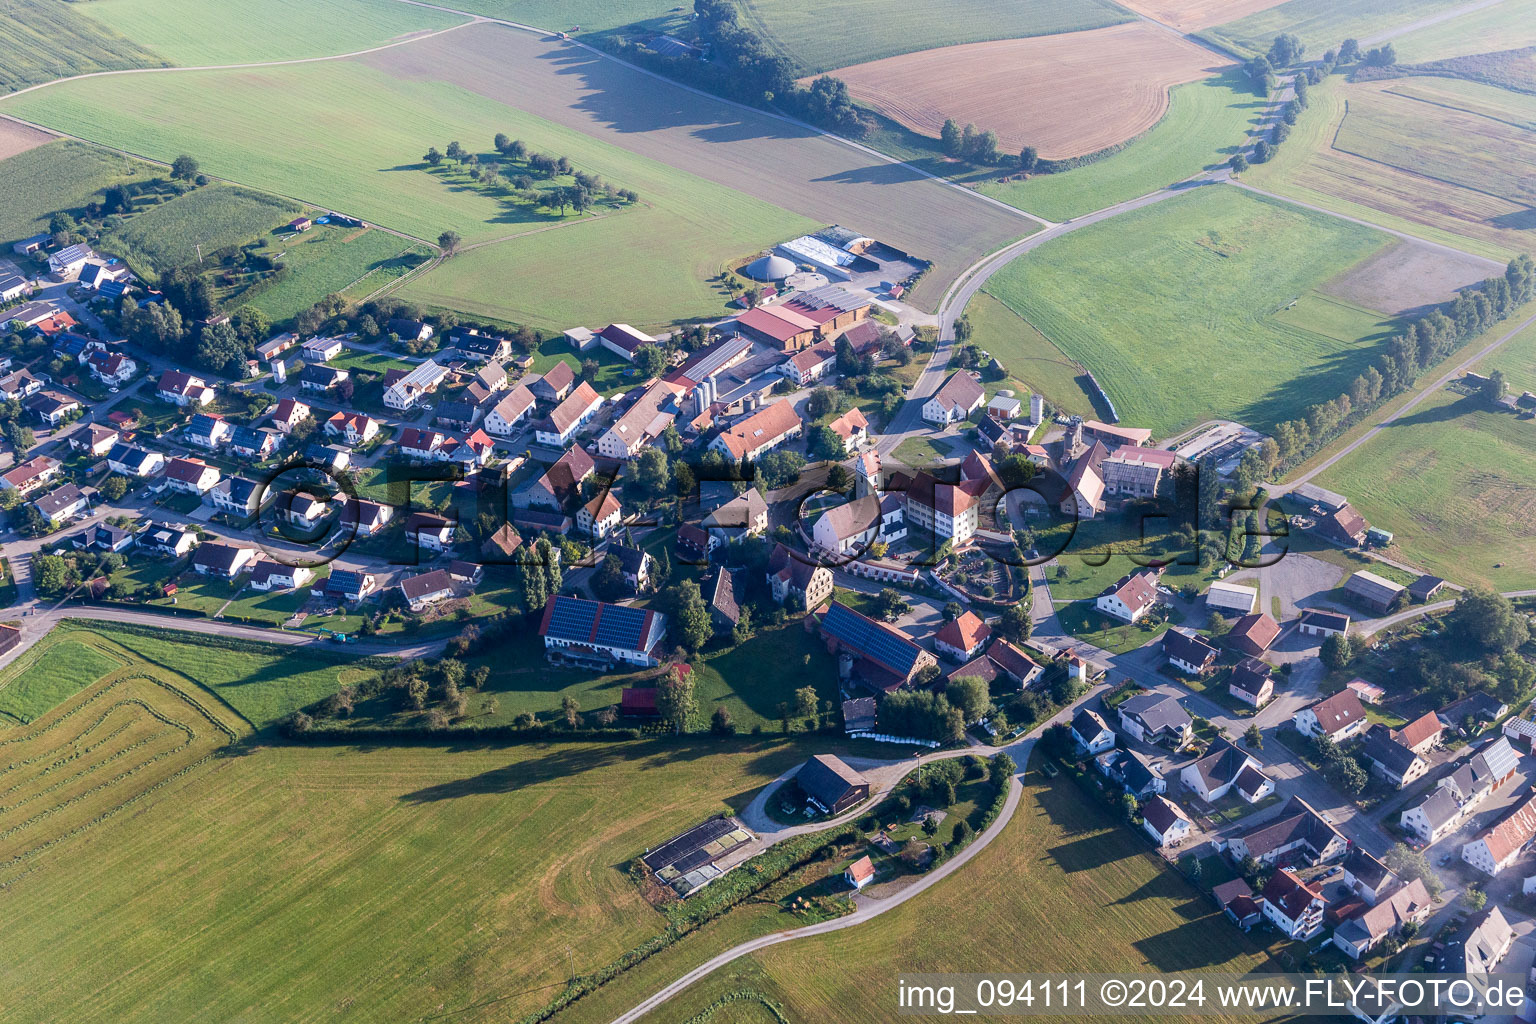 Village - view on the edge of agricultural fields and farmland in the district Moosheim in Bad Saulgau in the state Baden-Wurttemberg, Germany